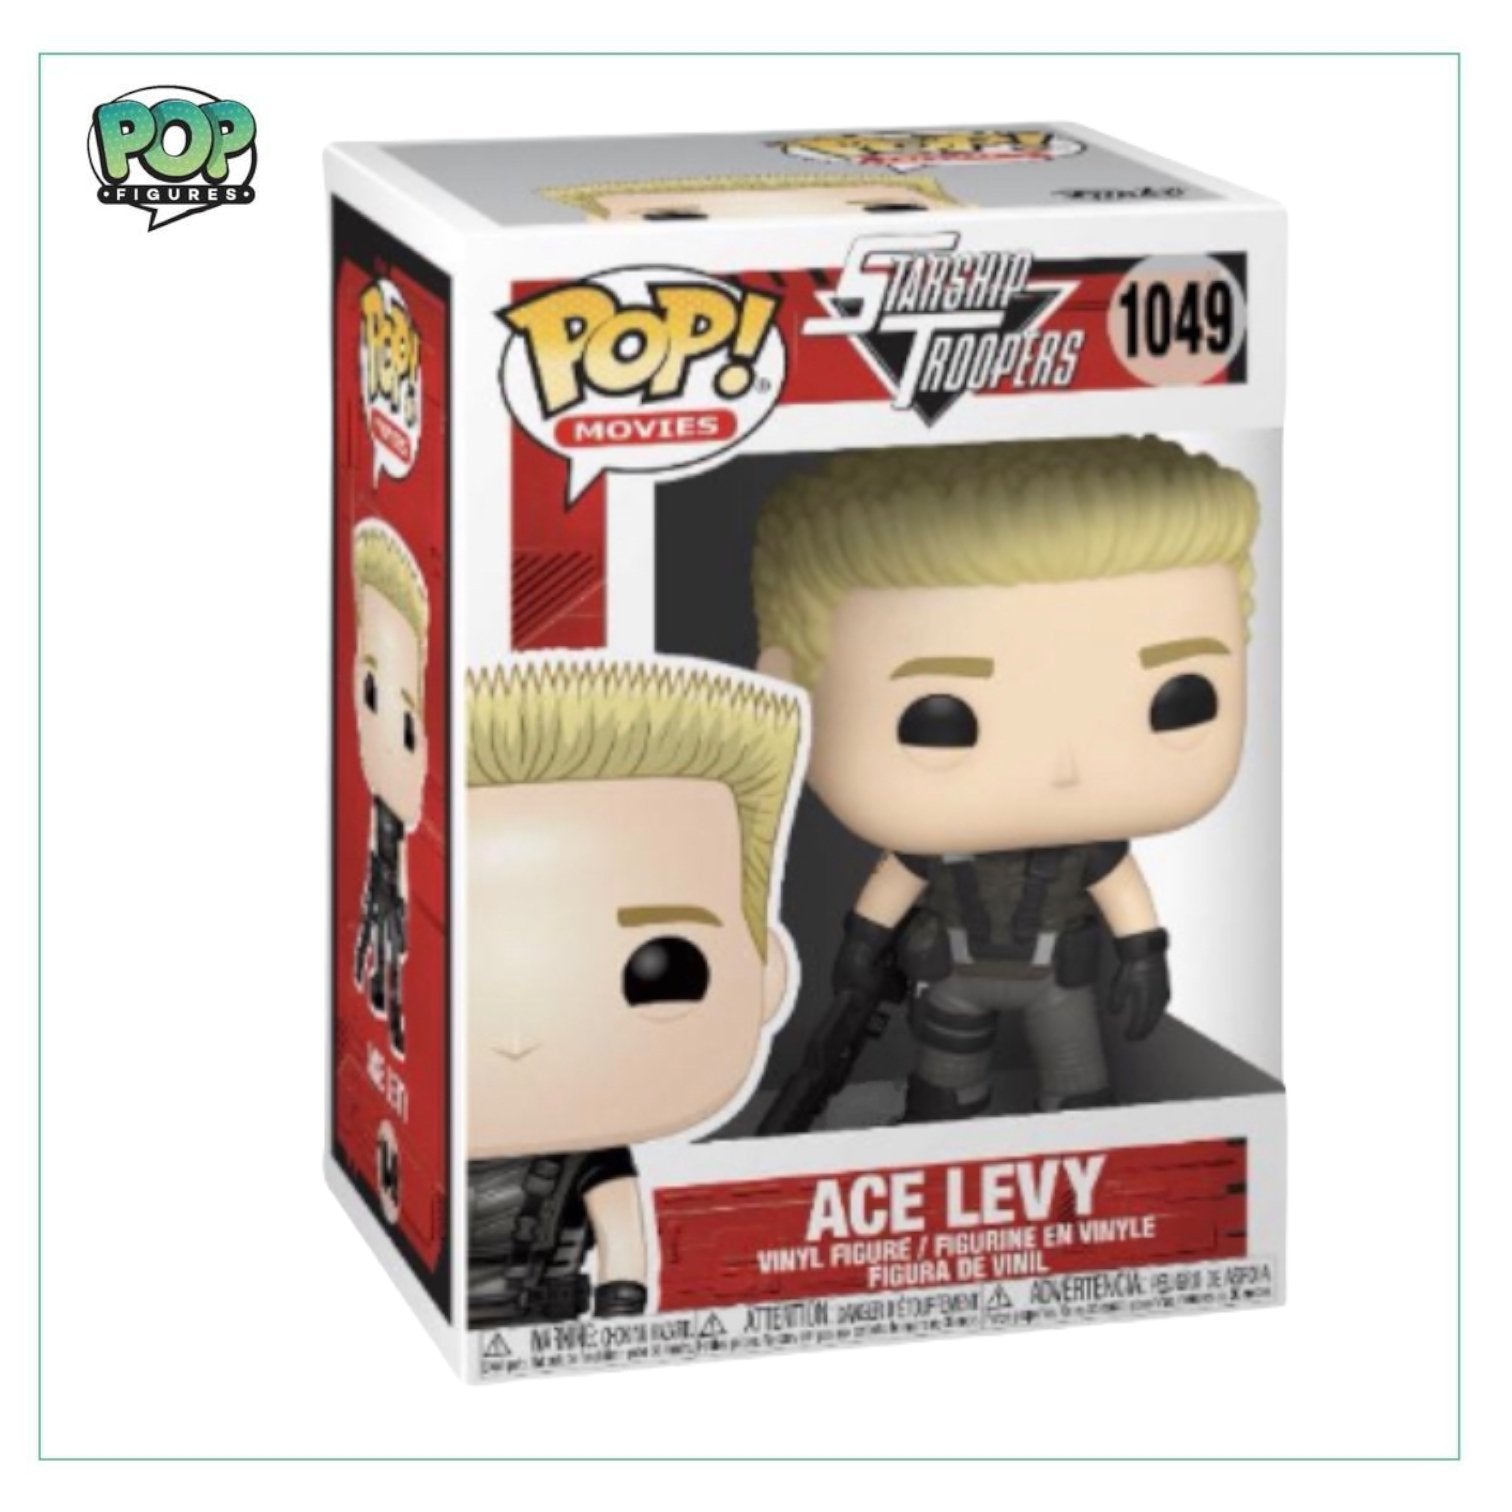 Ace Levy #1049 Funko Pop! Starship Troopers - Pop Figures | Funko | Pop Funko | Funko Pop